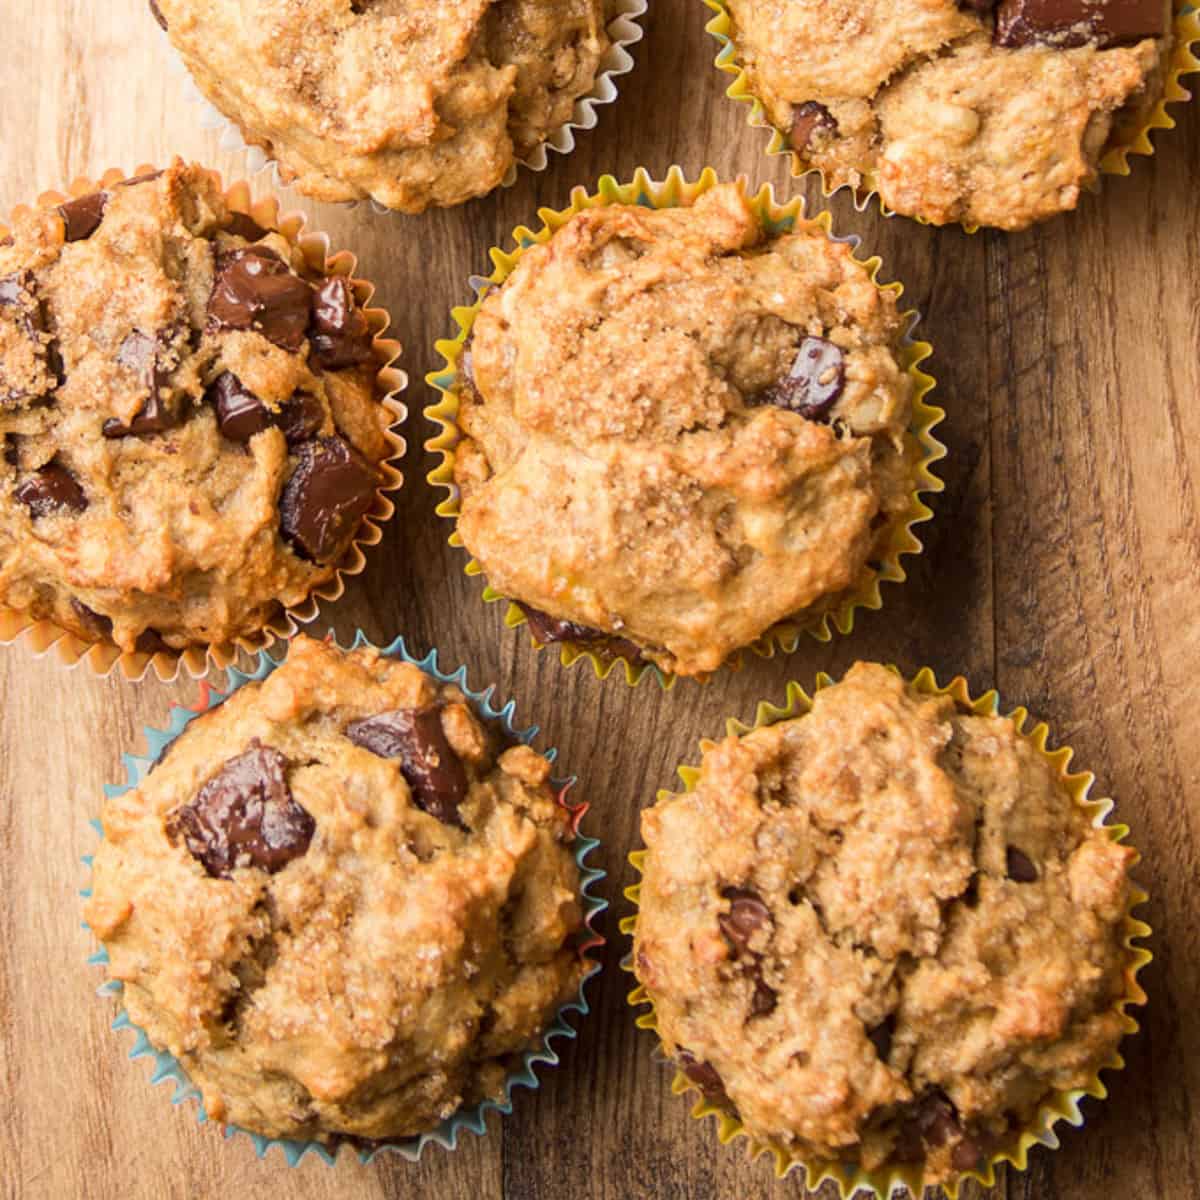 Vegan Banana Muffins on a wooden surface.